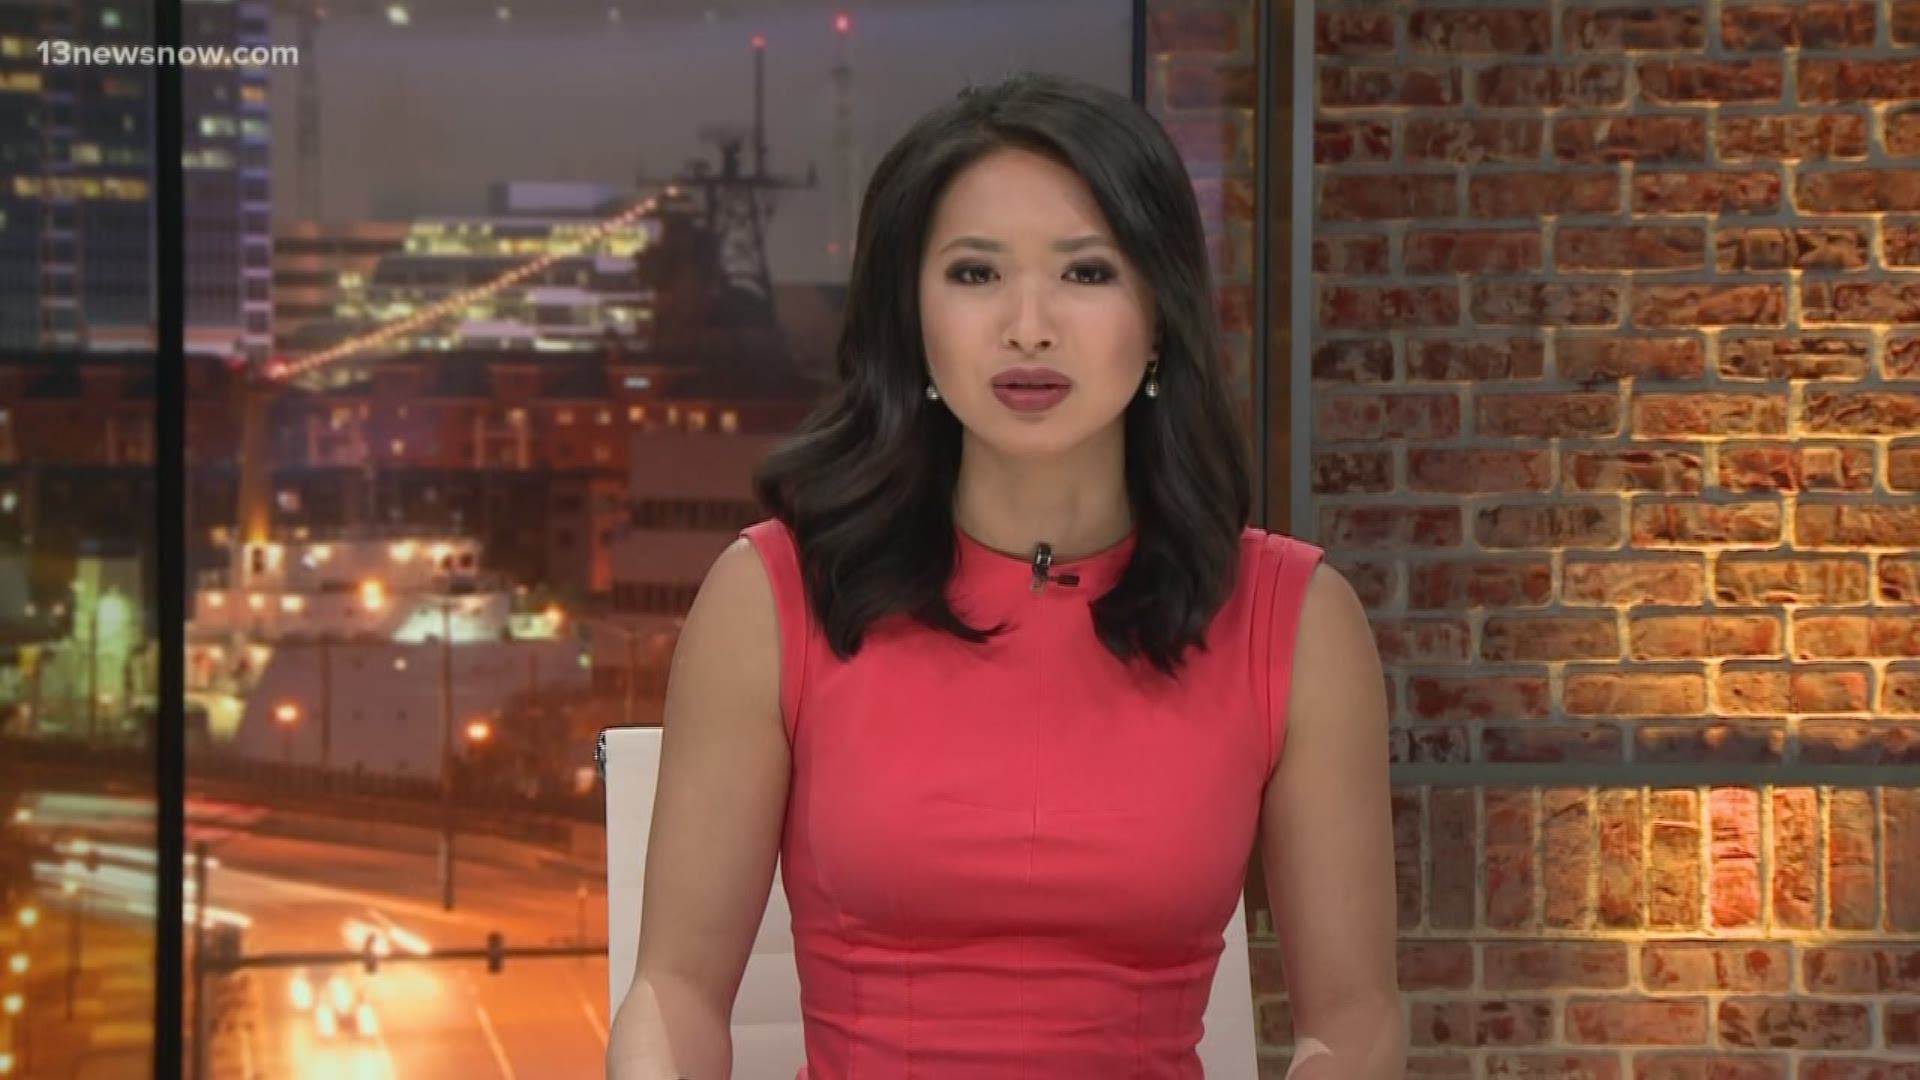 13News Now Anchor Jaclyn Lee has the top headlines at 11 p.m. on March 23, 2019